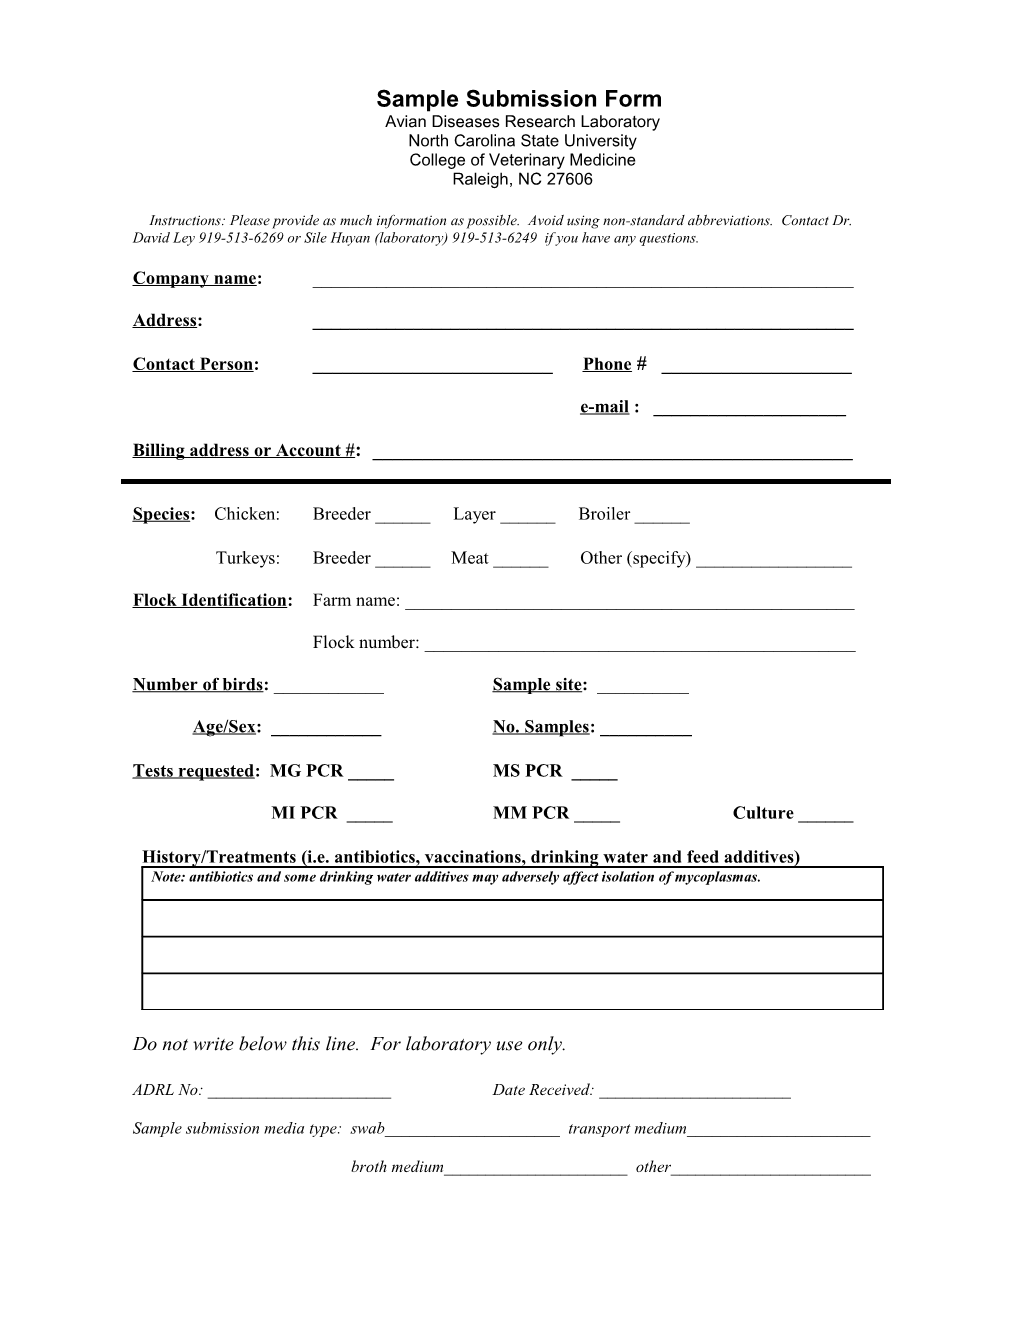 Sample Submission Form